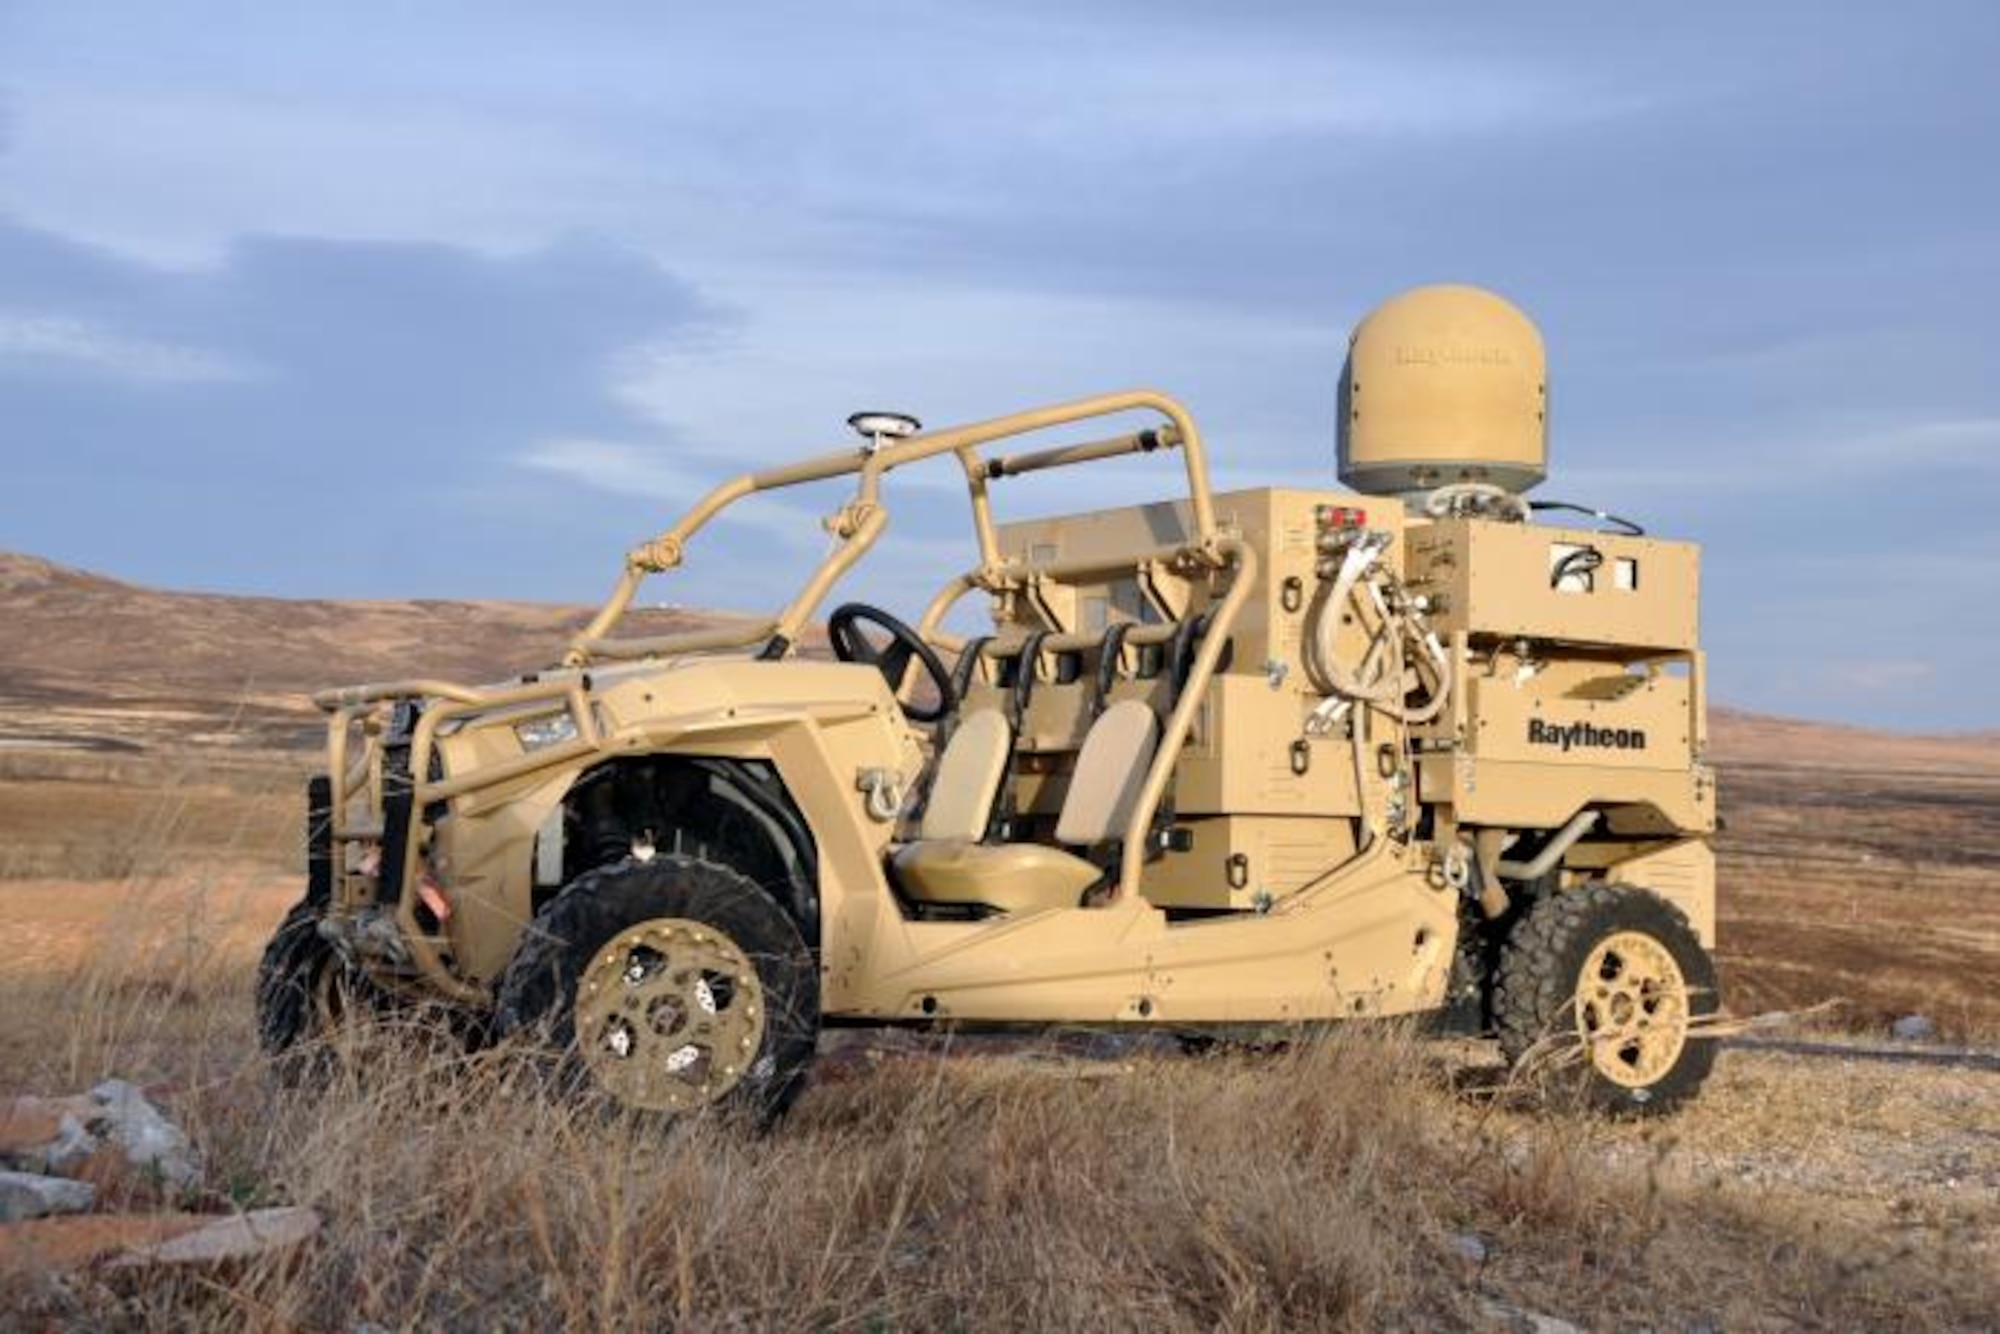 This is the Raytheon laser dune buggy, a solid-state laser combined with an advanced variant of the company’s Multi-Spectral Targeting System of sensors, installed on a small, all-terrain Polaris militarized vehicle. Coupled with a generator, the HEL weapon system provides military members with counter-UAV capabilities and a virtually unlimited magazine. The Raytheon High Energy Laser Weapon System as mounted on a light tactical vehicle was one of two Directed Energy systems that participated at the October 2018 experimentation event at White Sands Missile Range, New Mexico. The event was held as part of the Directed Energy Experimentation Campaign, which is headed by the 704th Test Group DE Combined Test Force. (U.S. Army photo by Monica K. Guthrie)